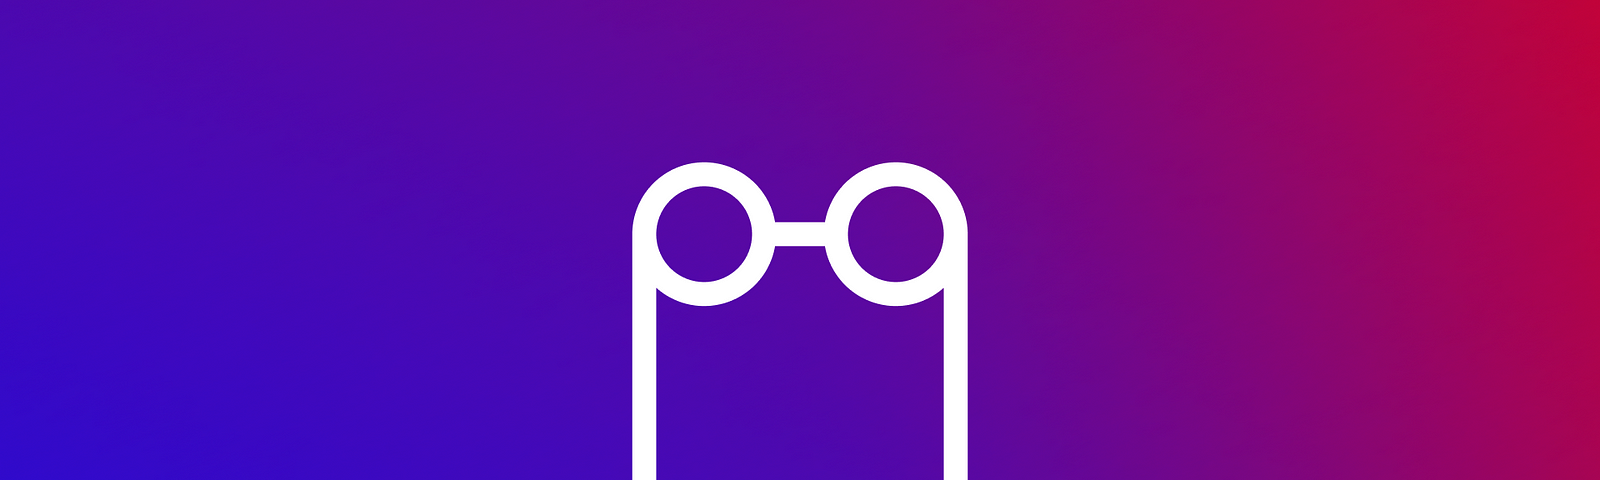 Gradient background with a white icon of glasses